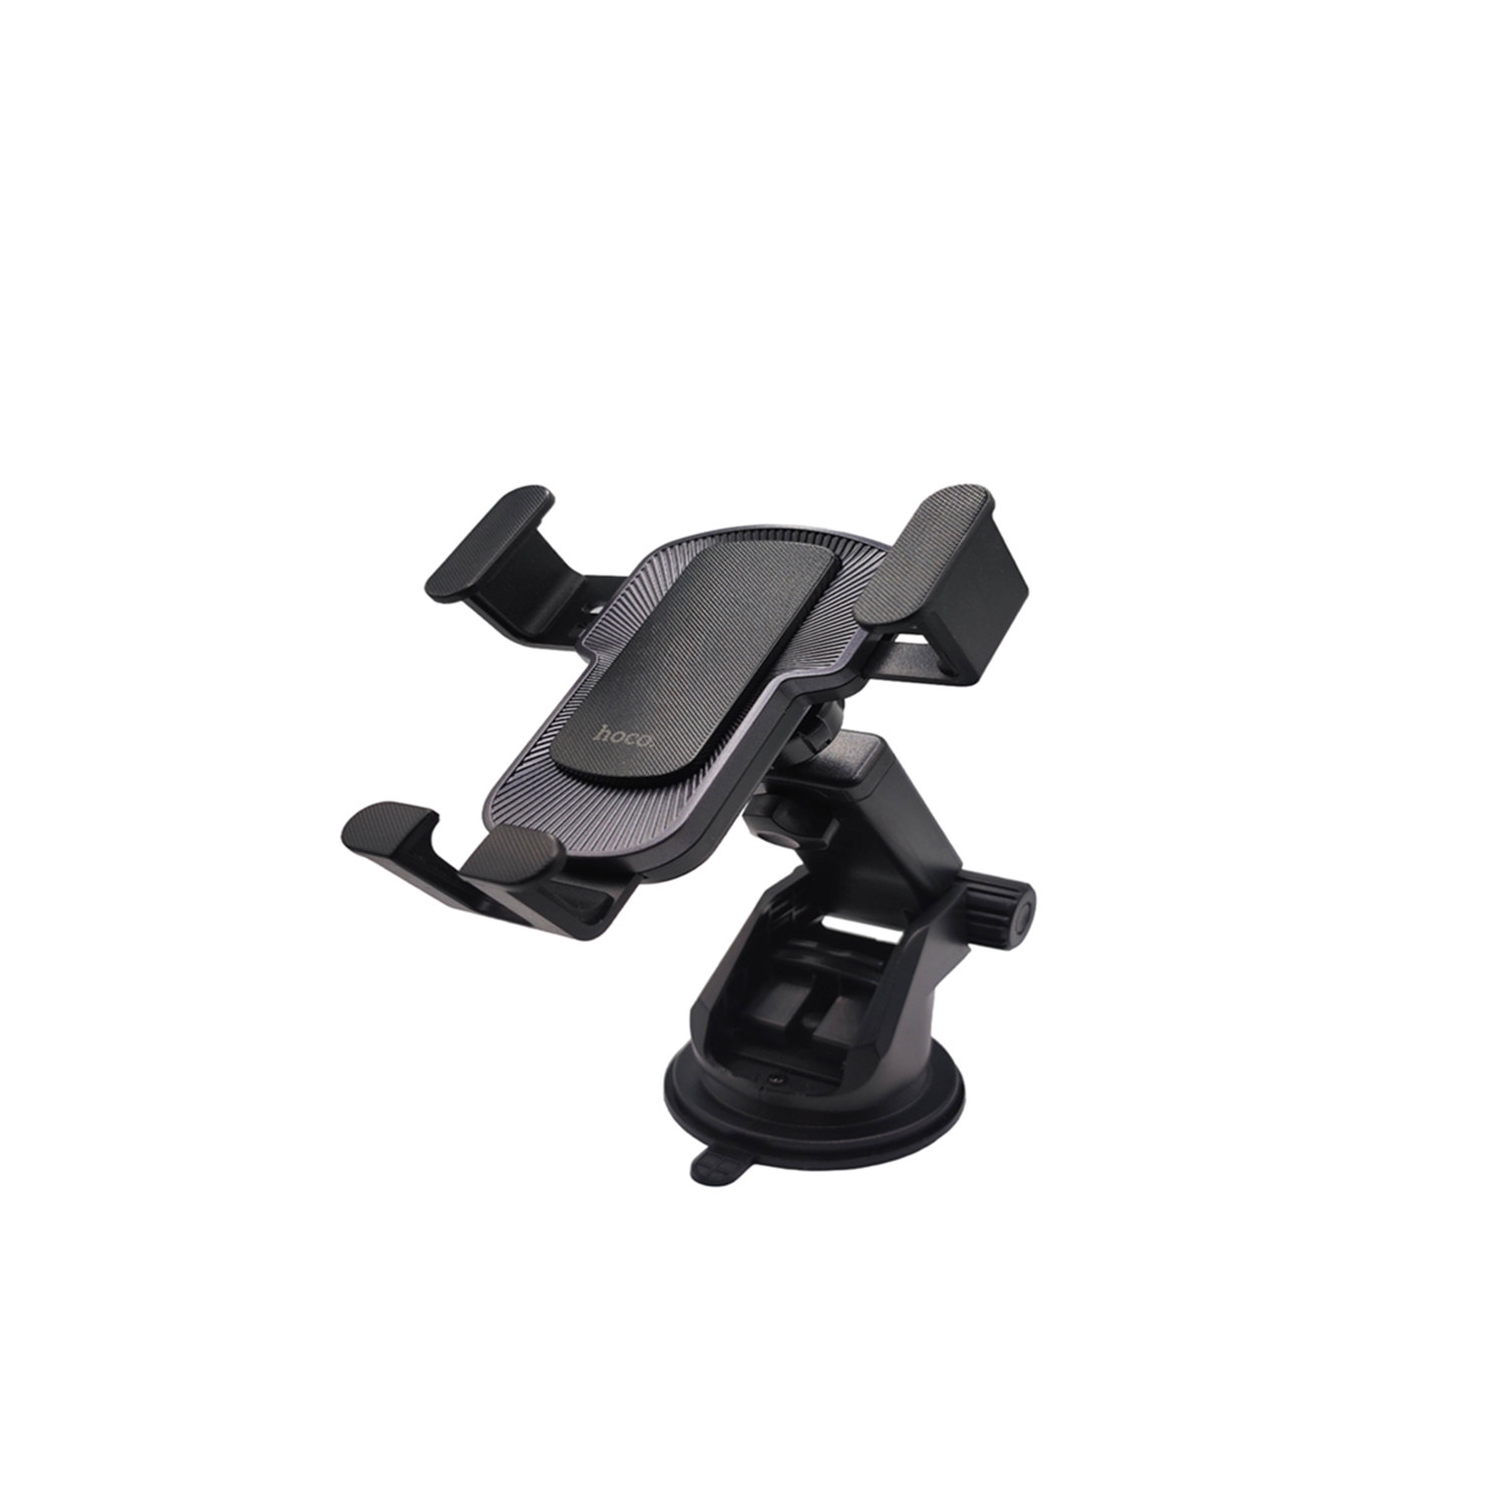 Universal Dashboard Windshield Sticky Suction Cup Car Cell Phone Mount Holder for iPhone Samsung Smartphones